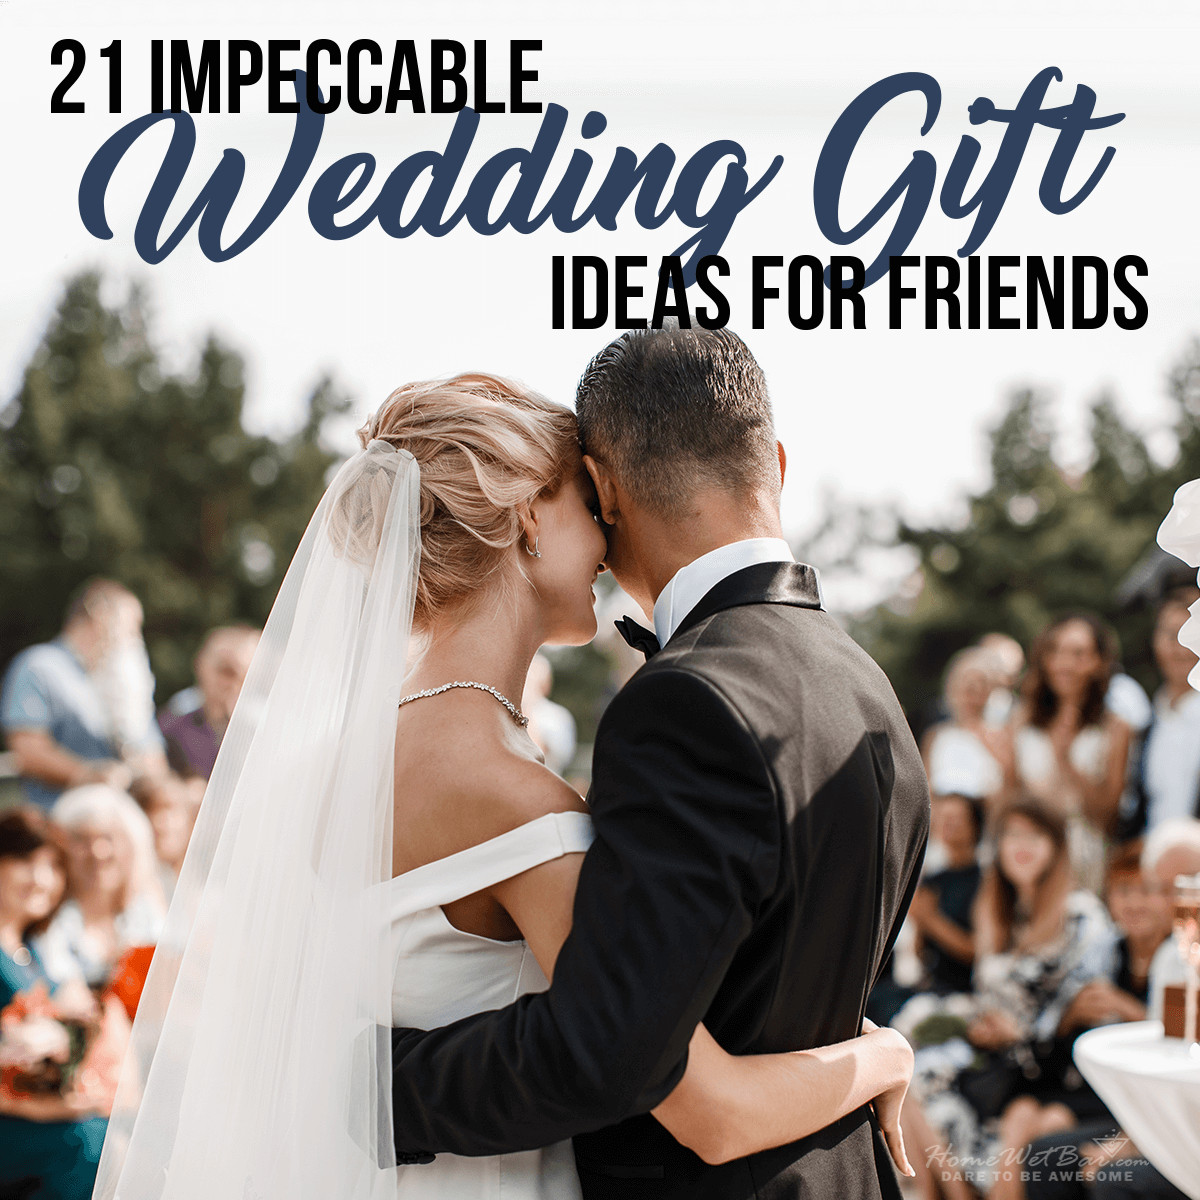 Engagement Gift Ideas For Young Couples
 21 Impeccable Wedding Gift Ideas for Friends